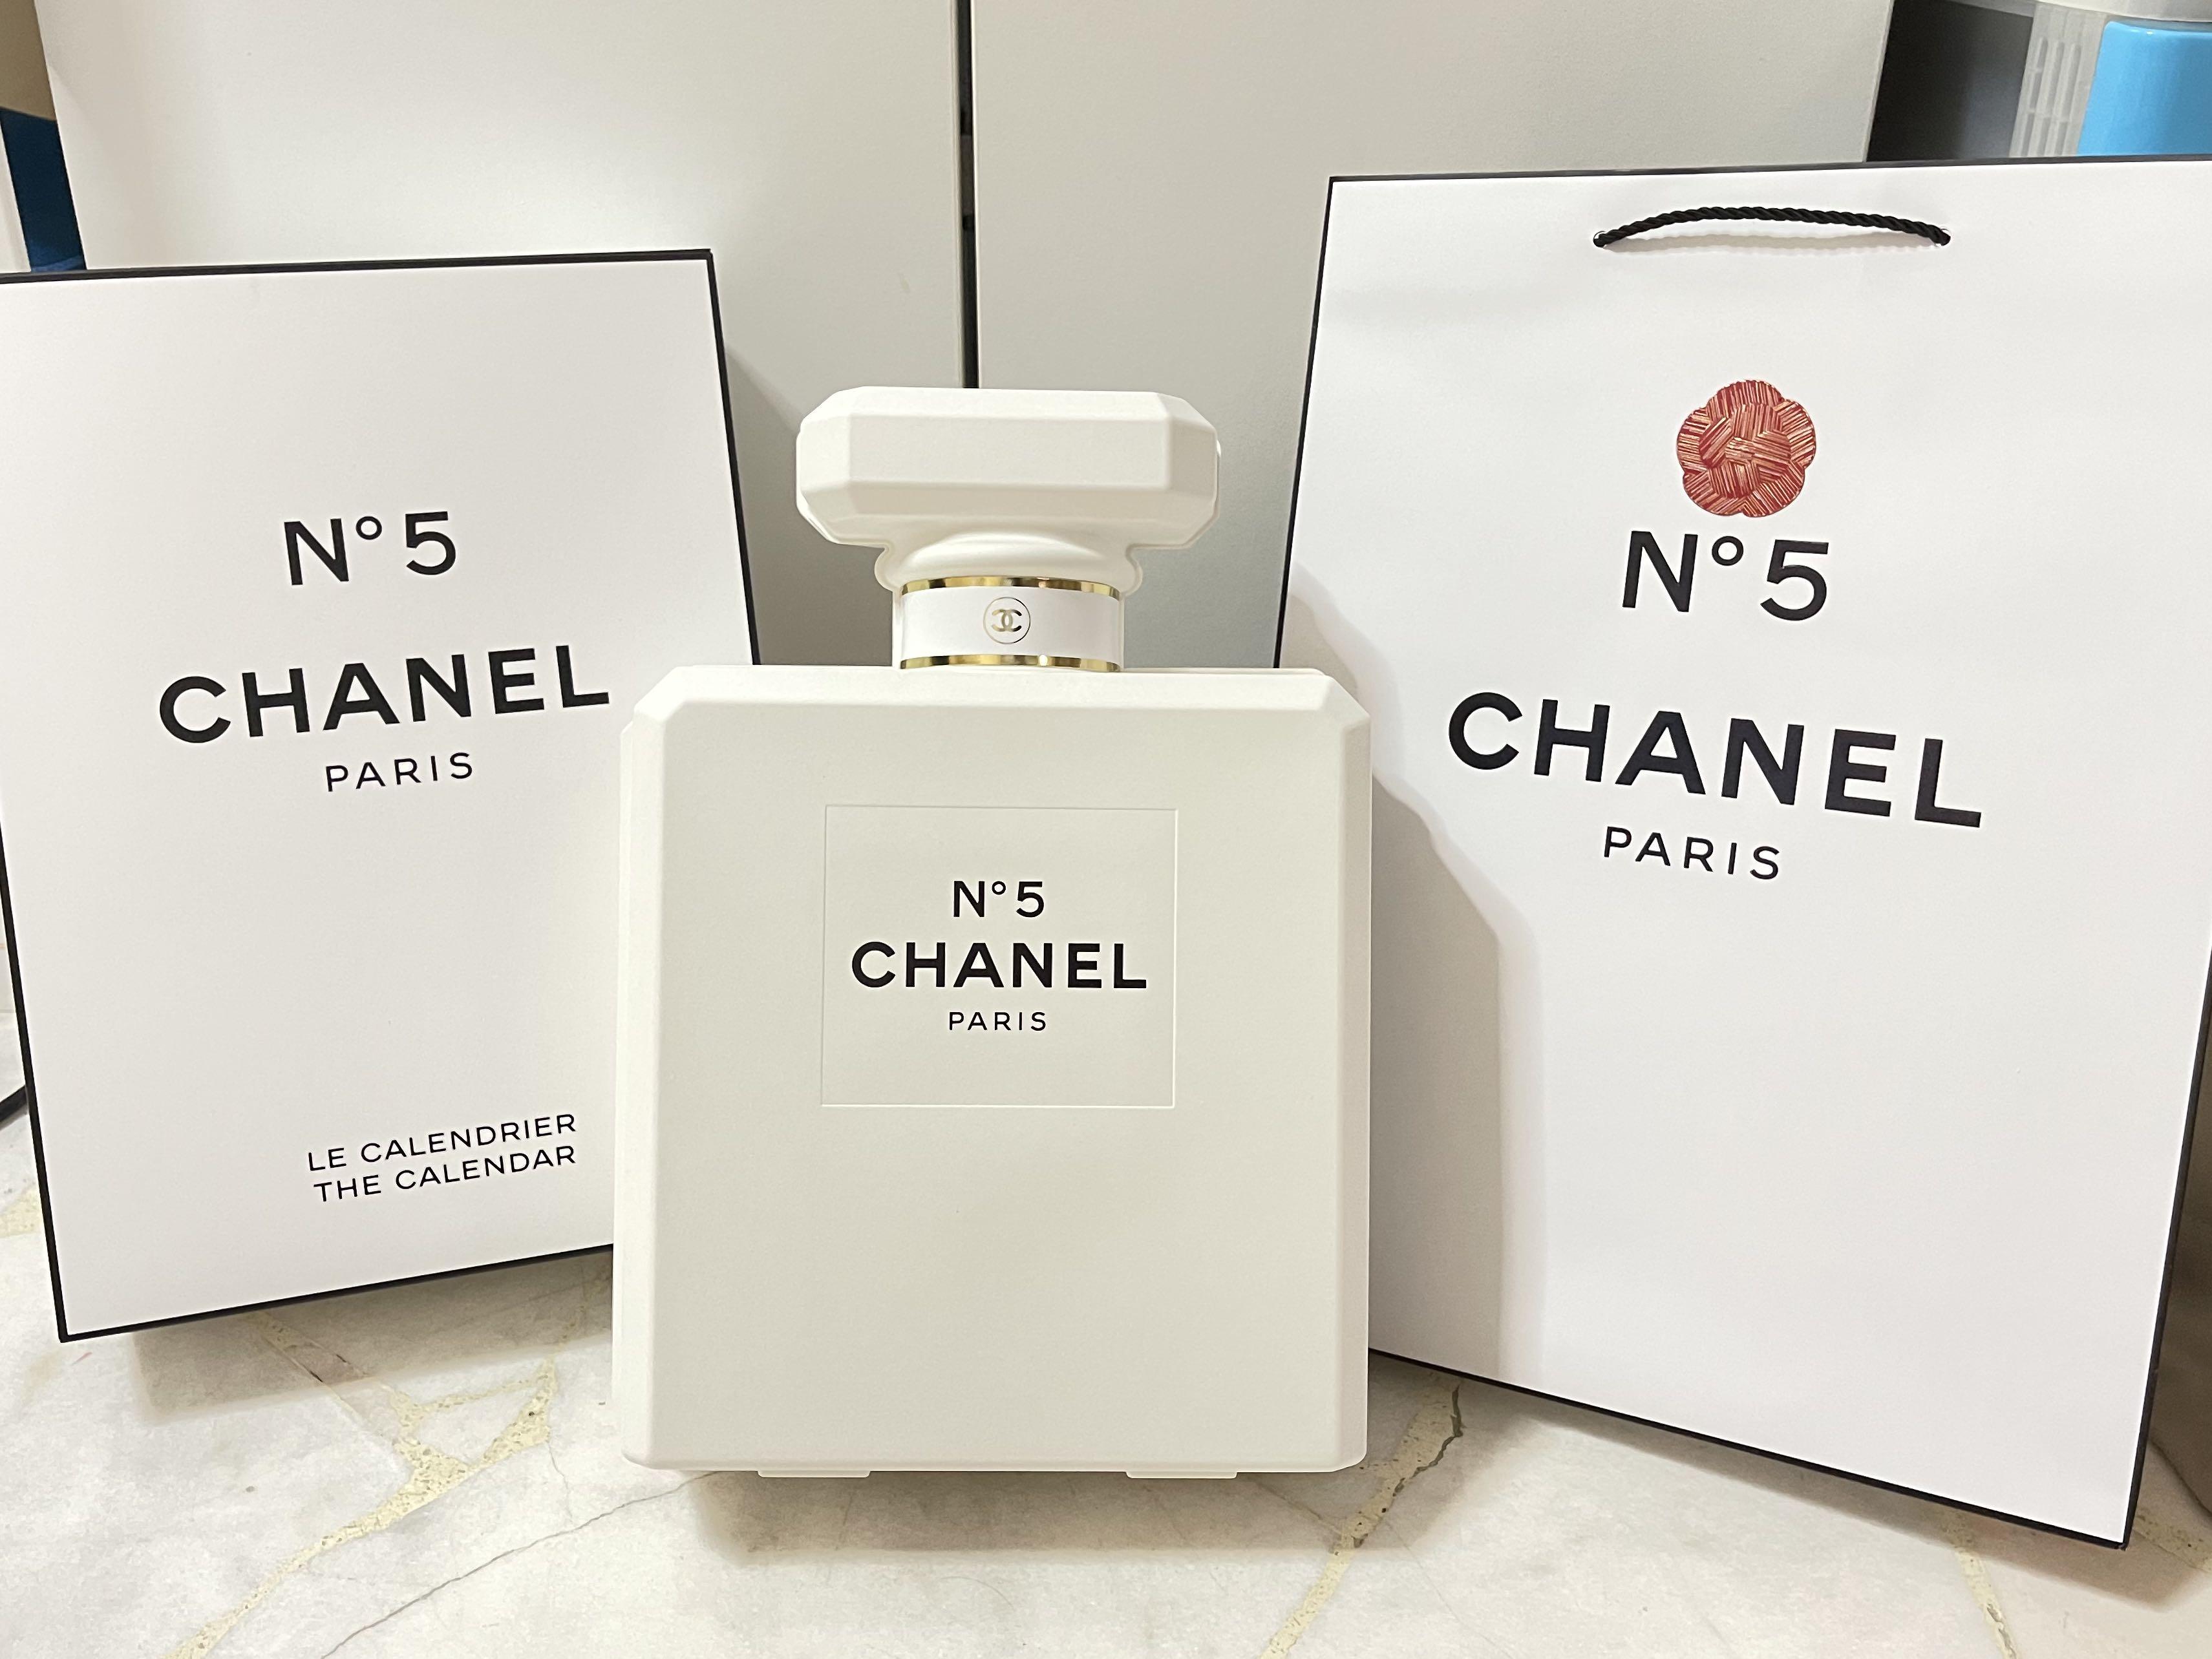 CHANEL introduces the N5 HOLIDAY 2021 COLLECTION  Time International